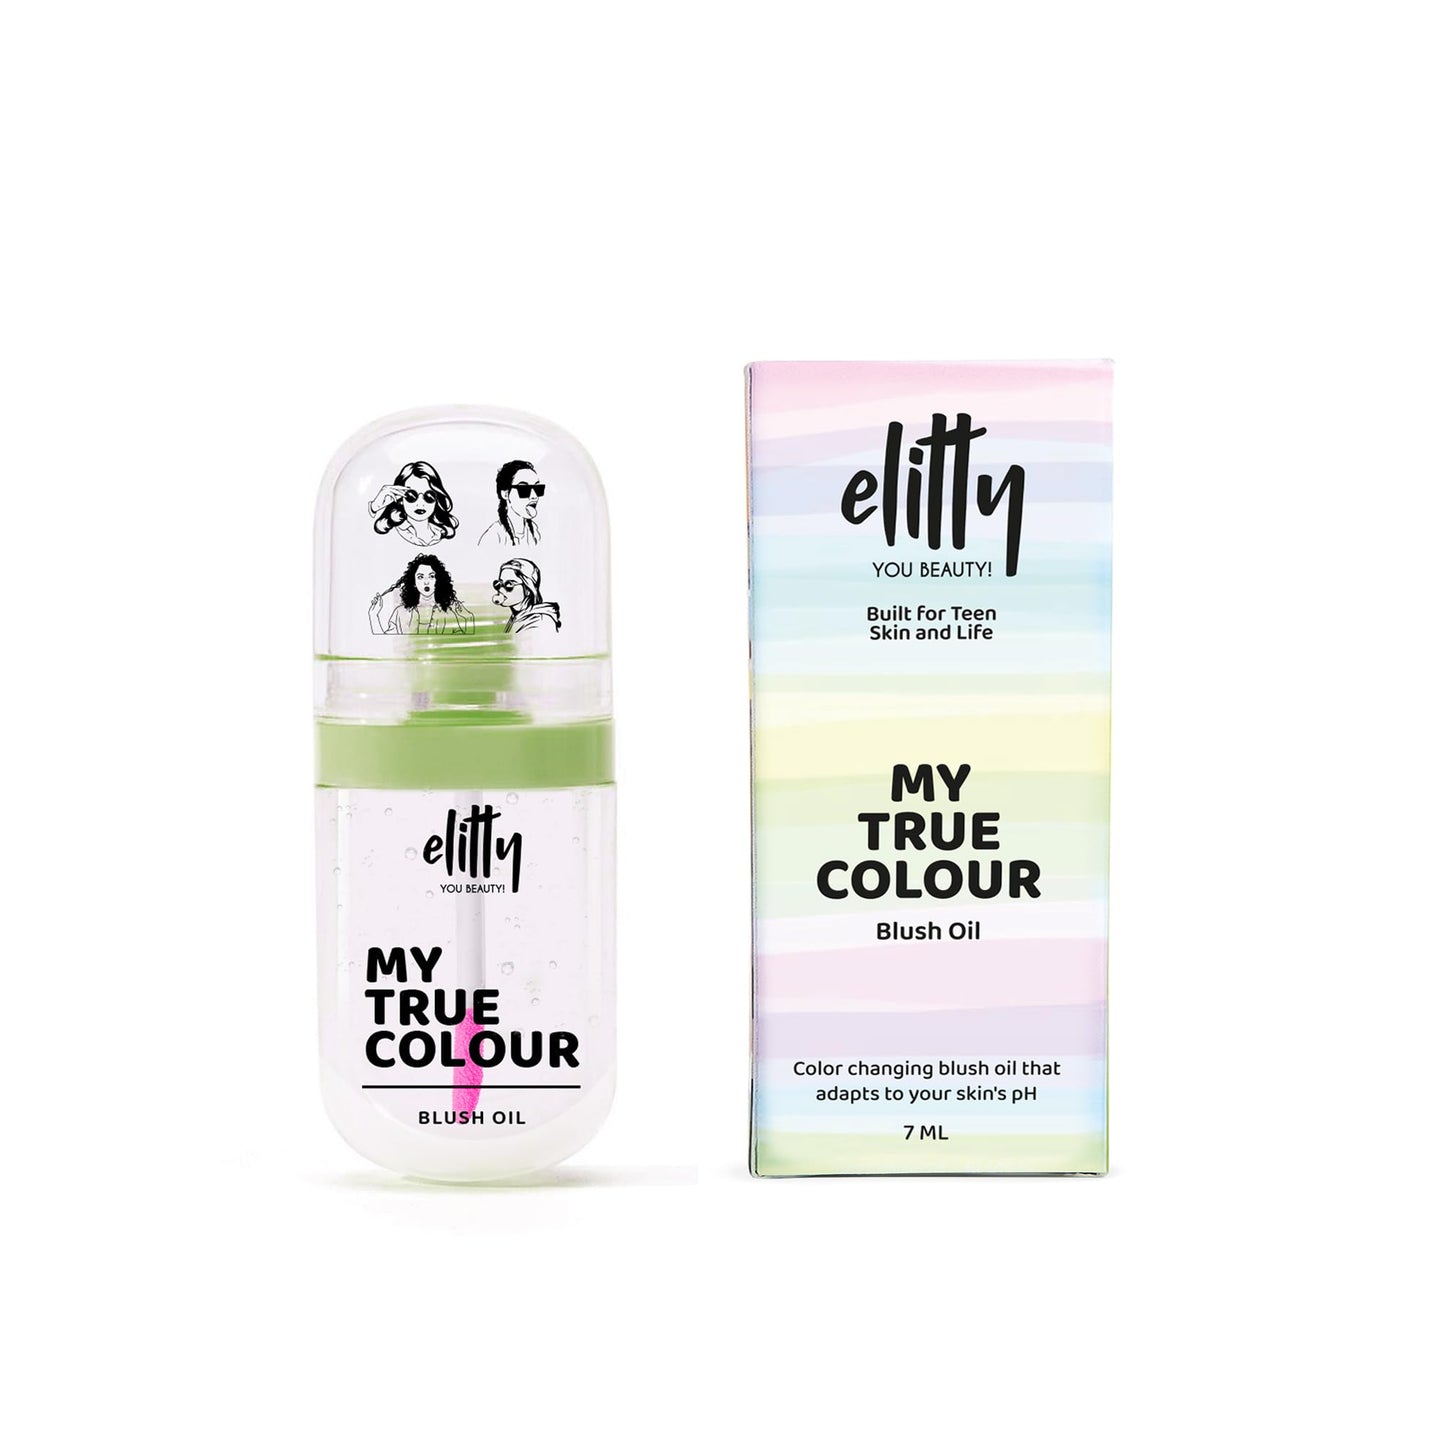 Elitty pH-Adaptive Lip and Cheek Blush Oil - Enriched With Vitamin E (7ml) for Effortlessly Radiant Lip and Cheeks.